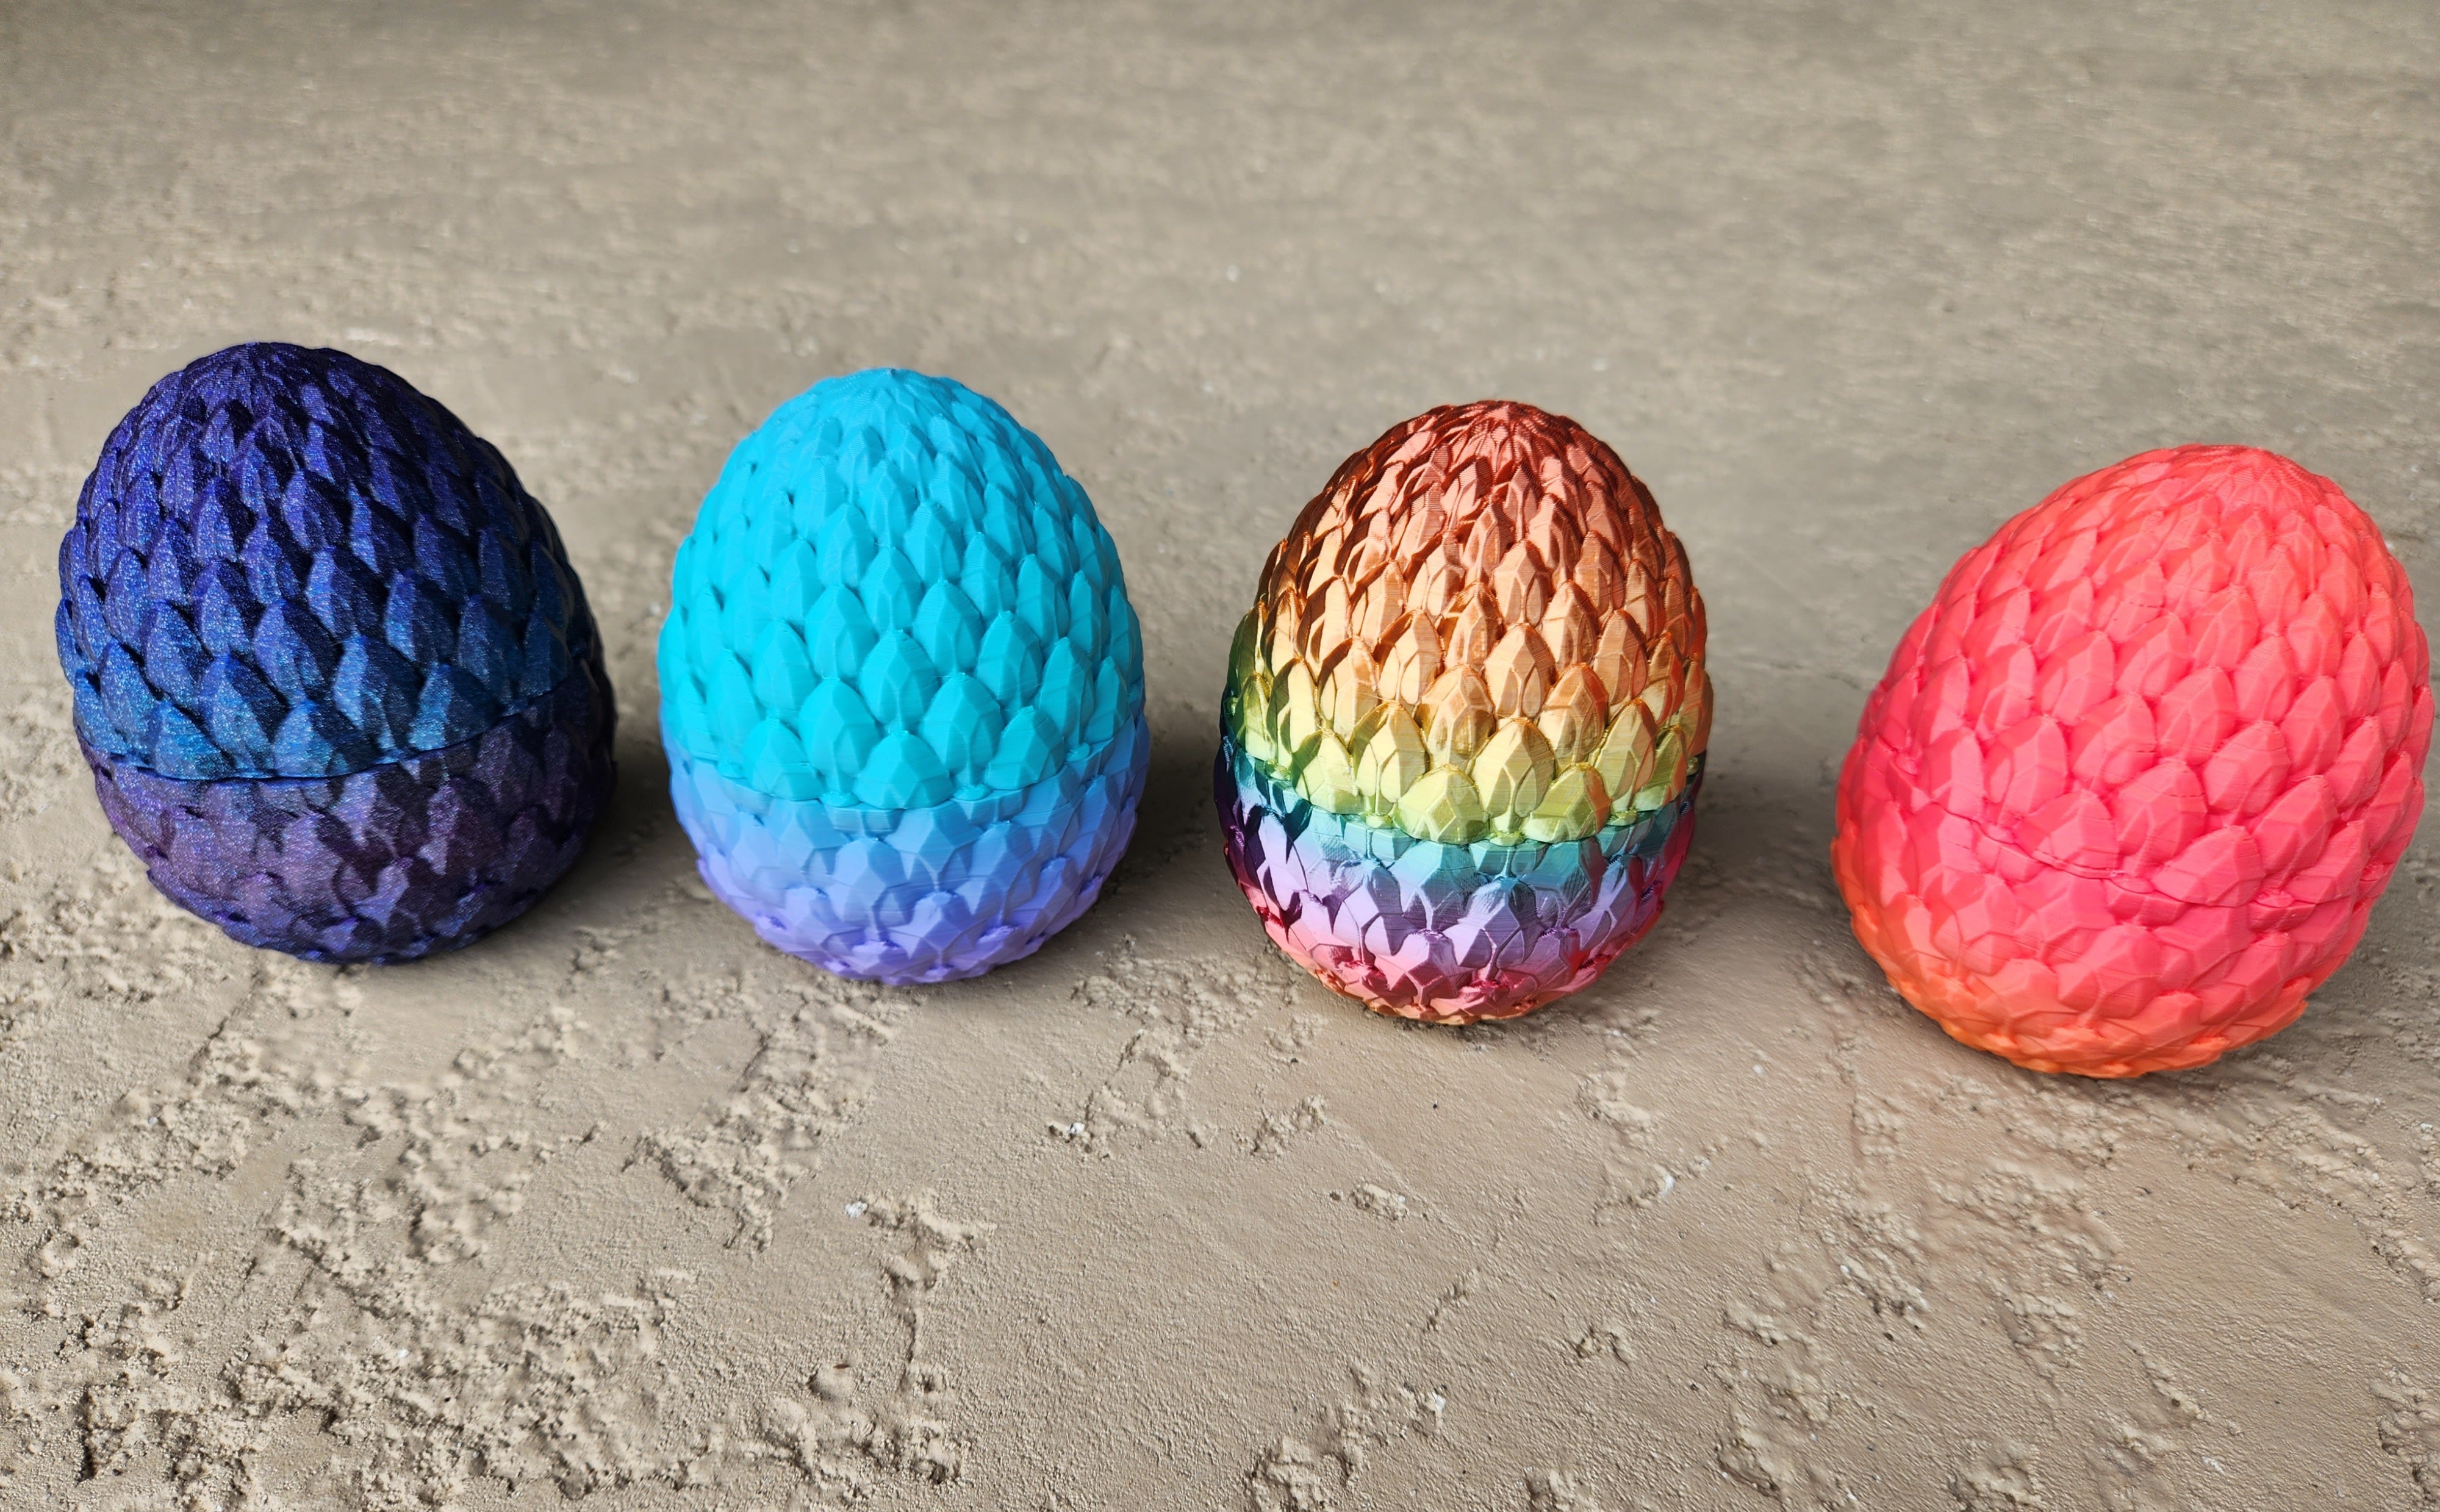 game of thrones dragon eggs drawings